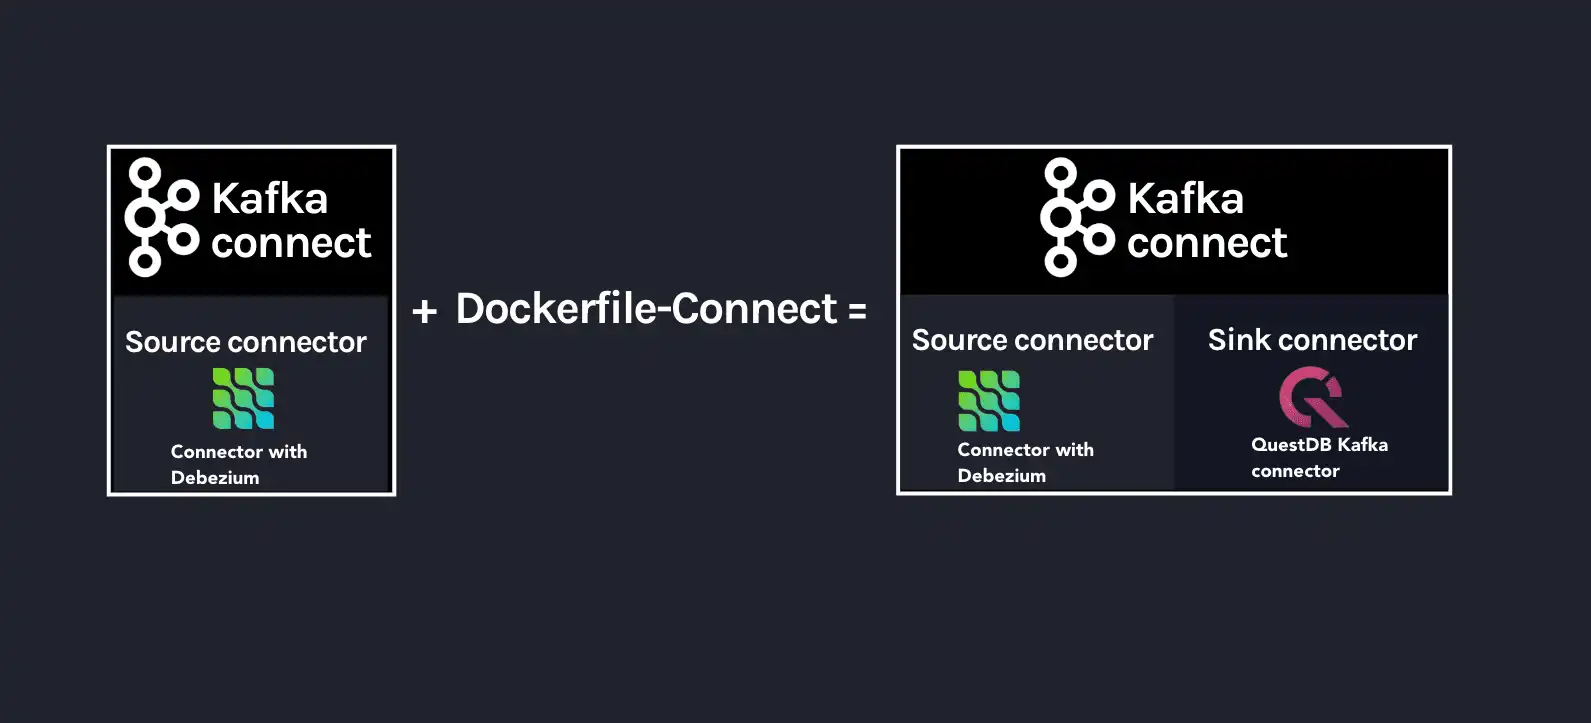 Diagram showing Dockerfile-Coonnect adding the QuestDB Kafka Connector layer